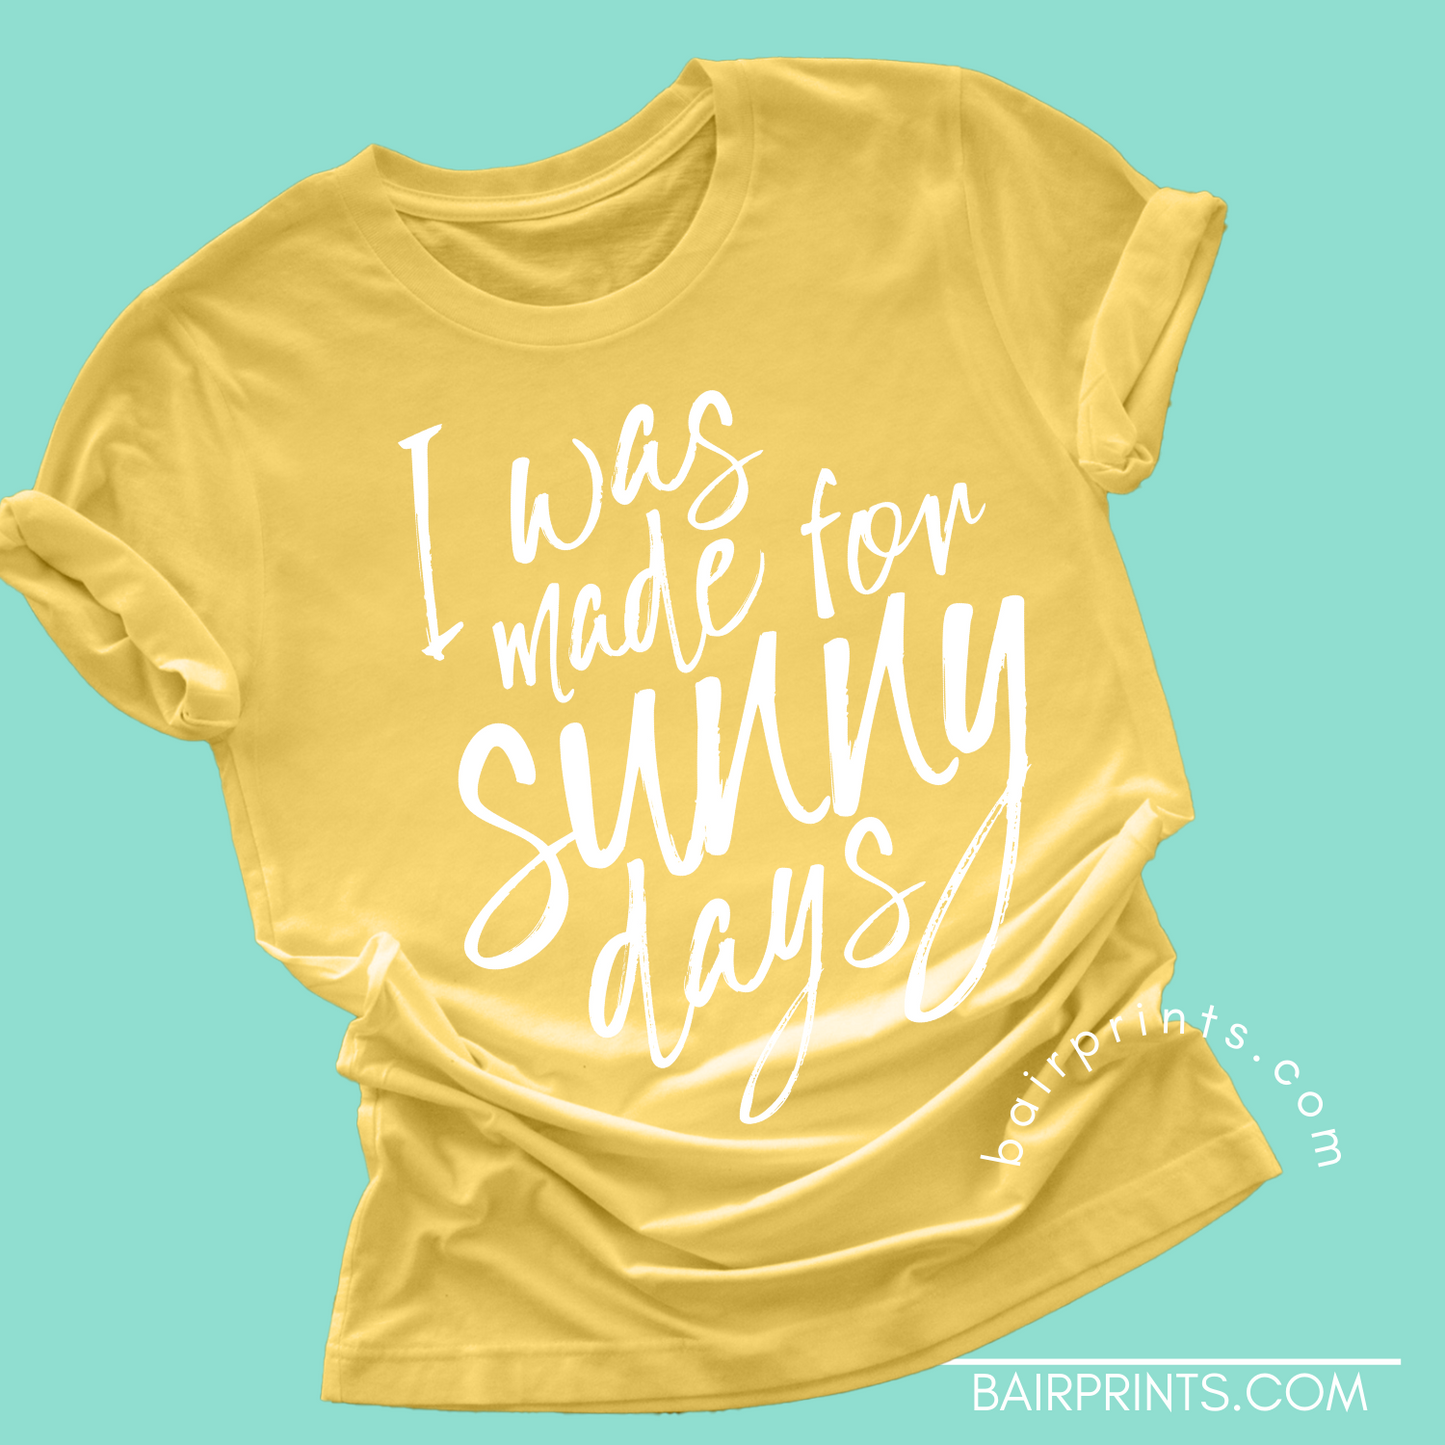 I Was Made for Sunny Days Screen Printed Tee